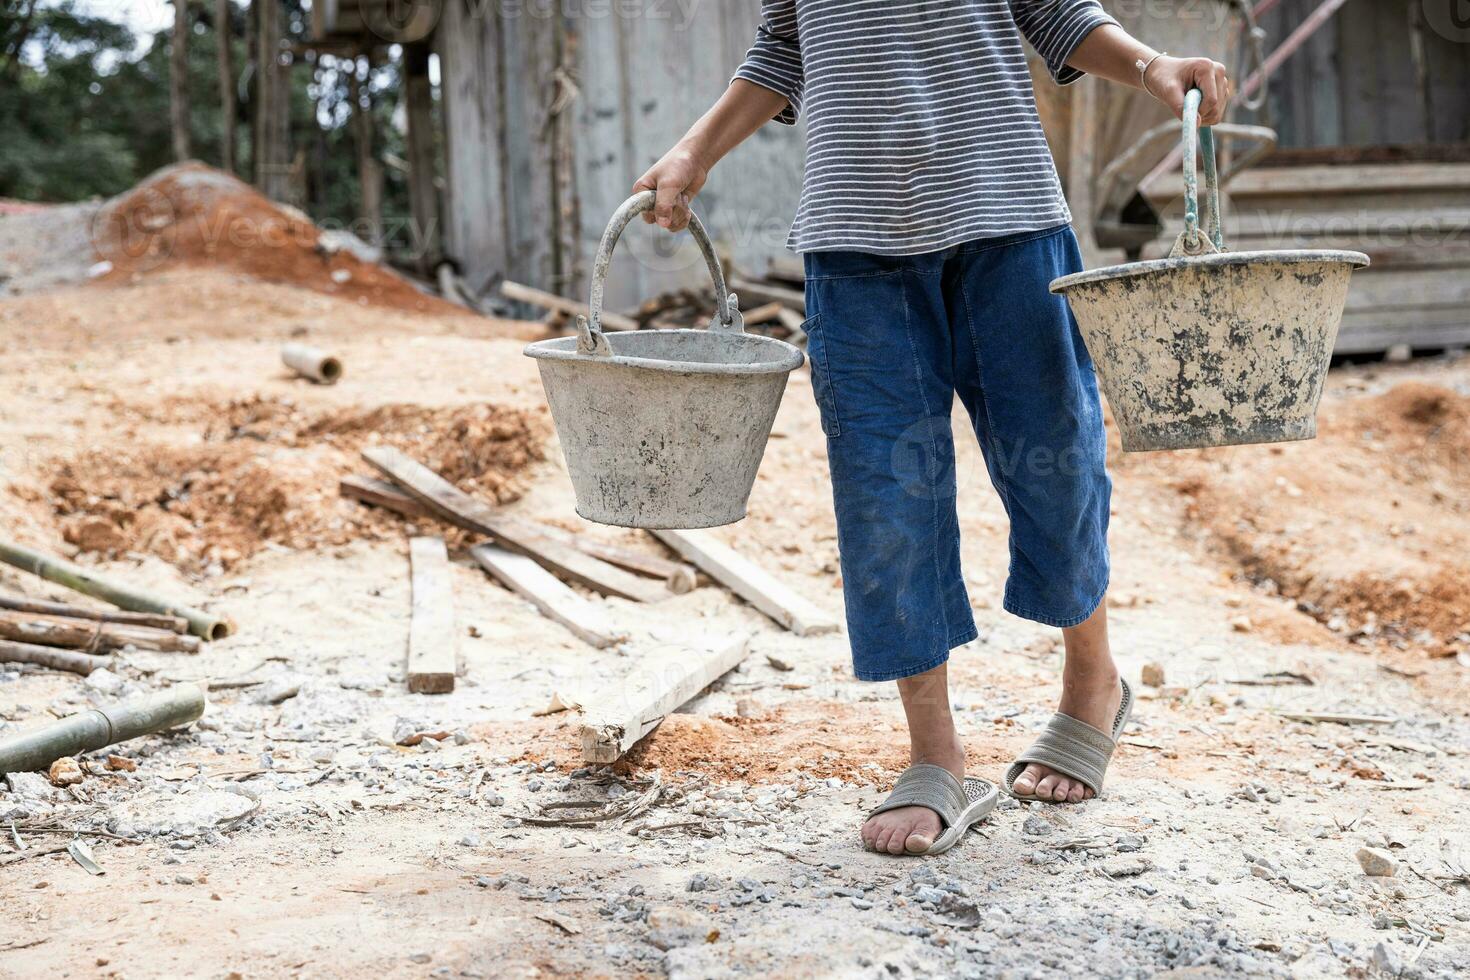 Children forced to work hard at construction site, child labor concept, poor children victims of human trafficking process, poverty, child abuse. photo